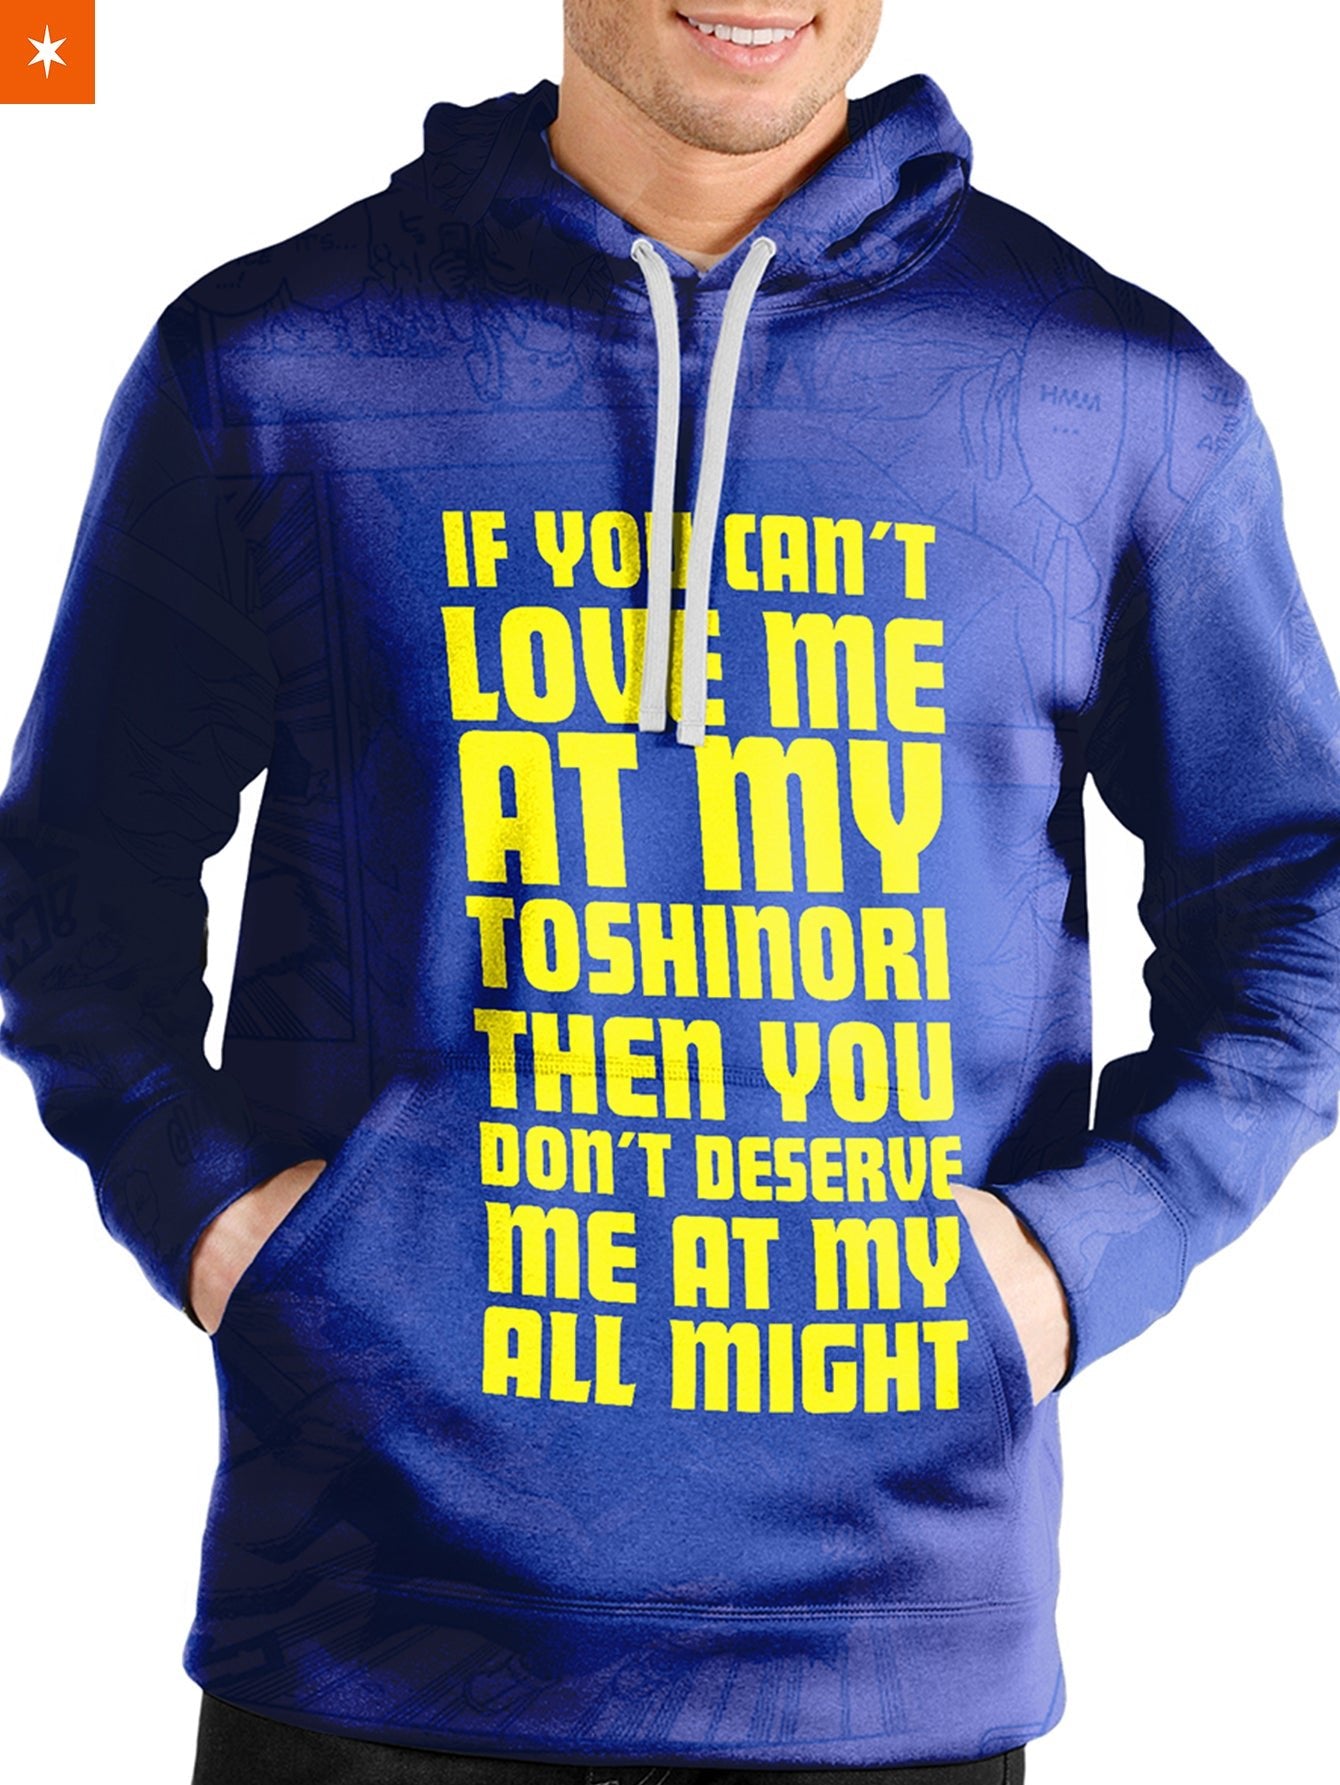 Fandomaniax - You Don't Deserve Me at My All Might Unisex Pullover Hoodie